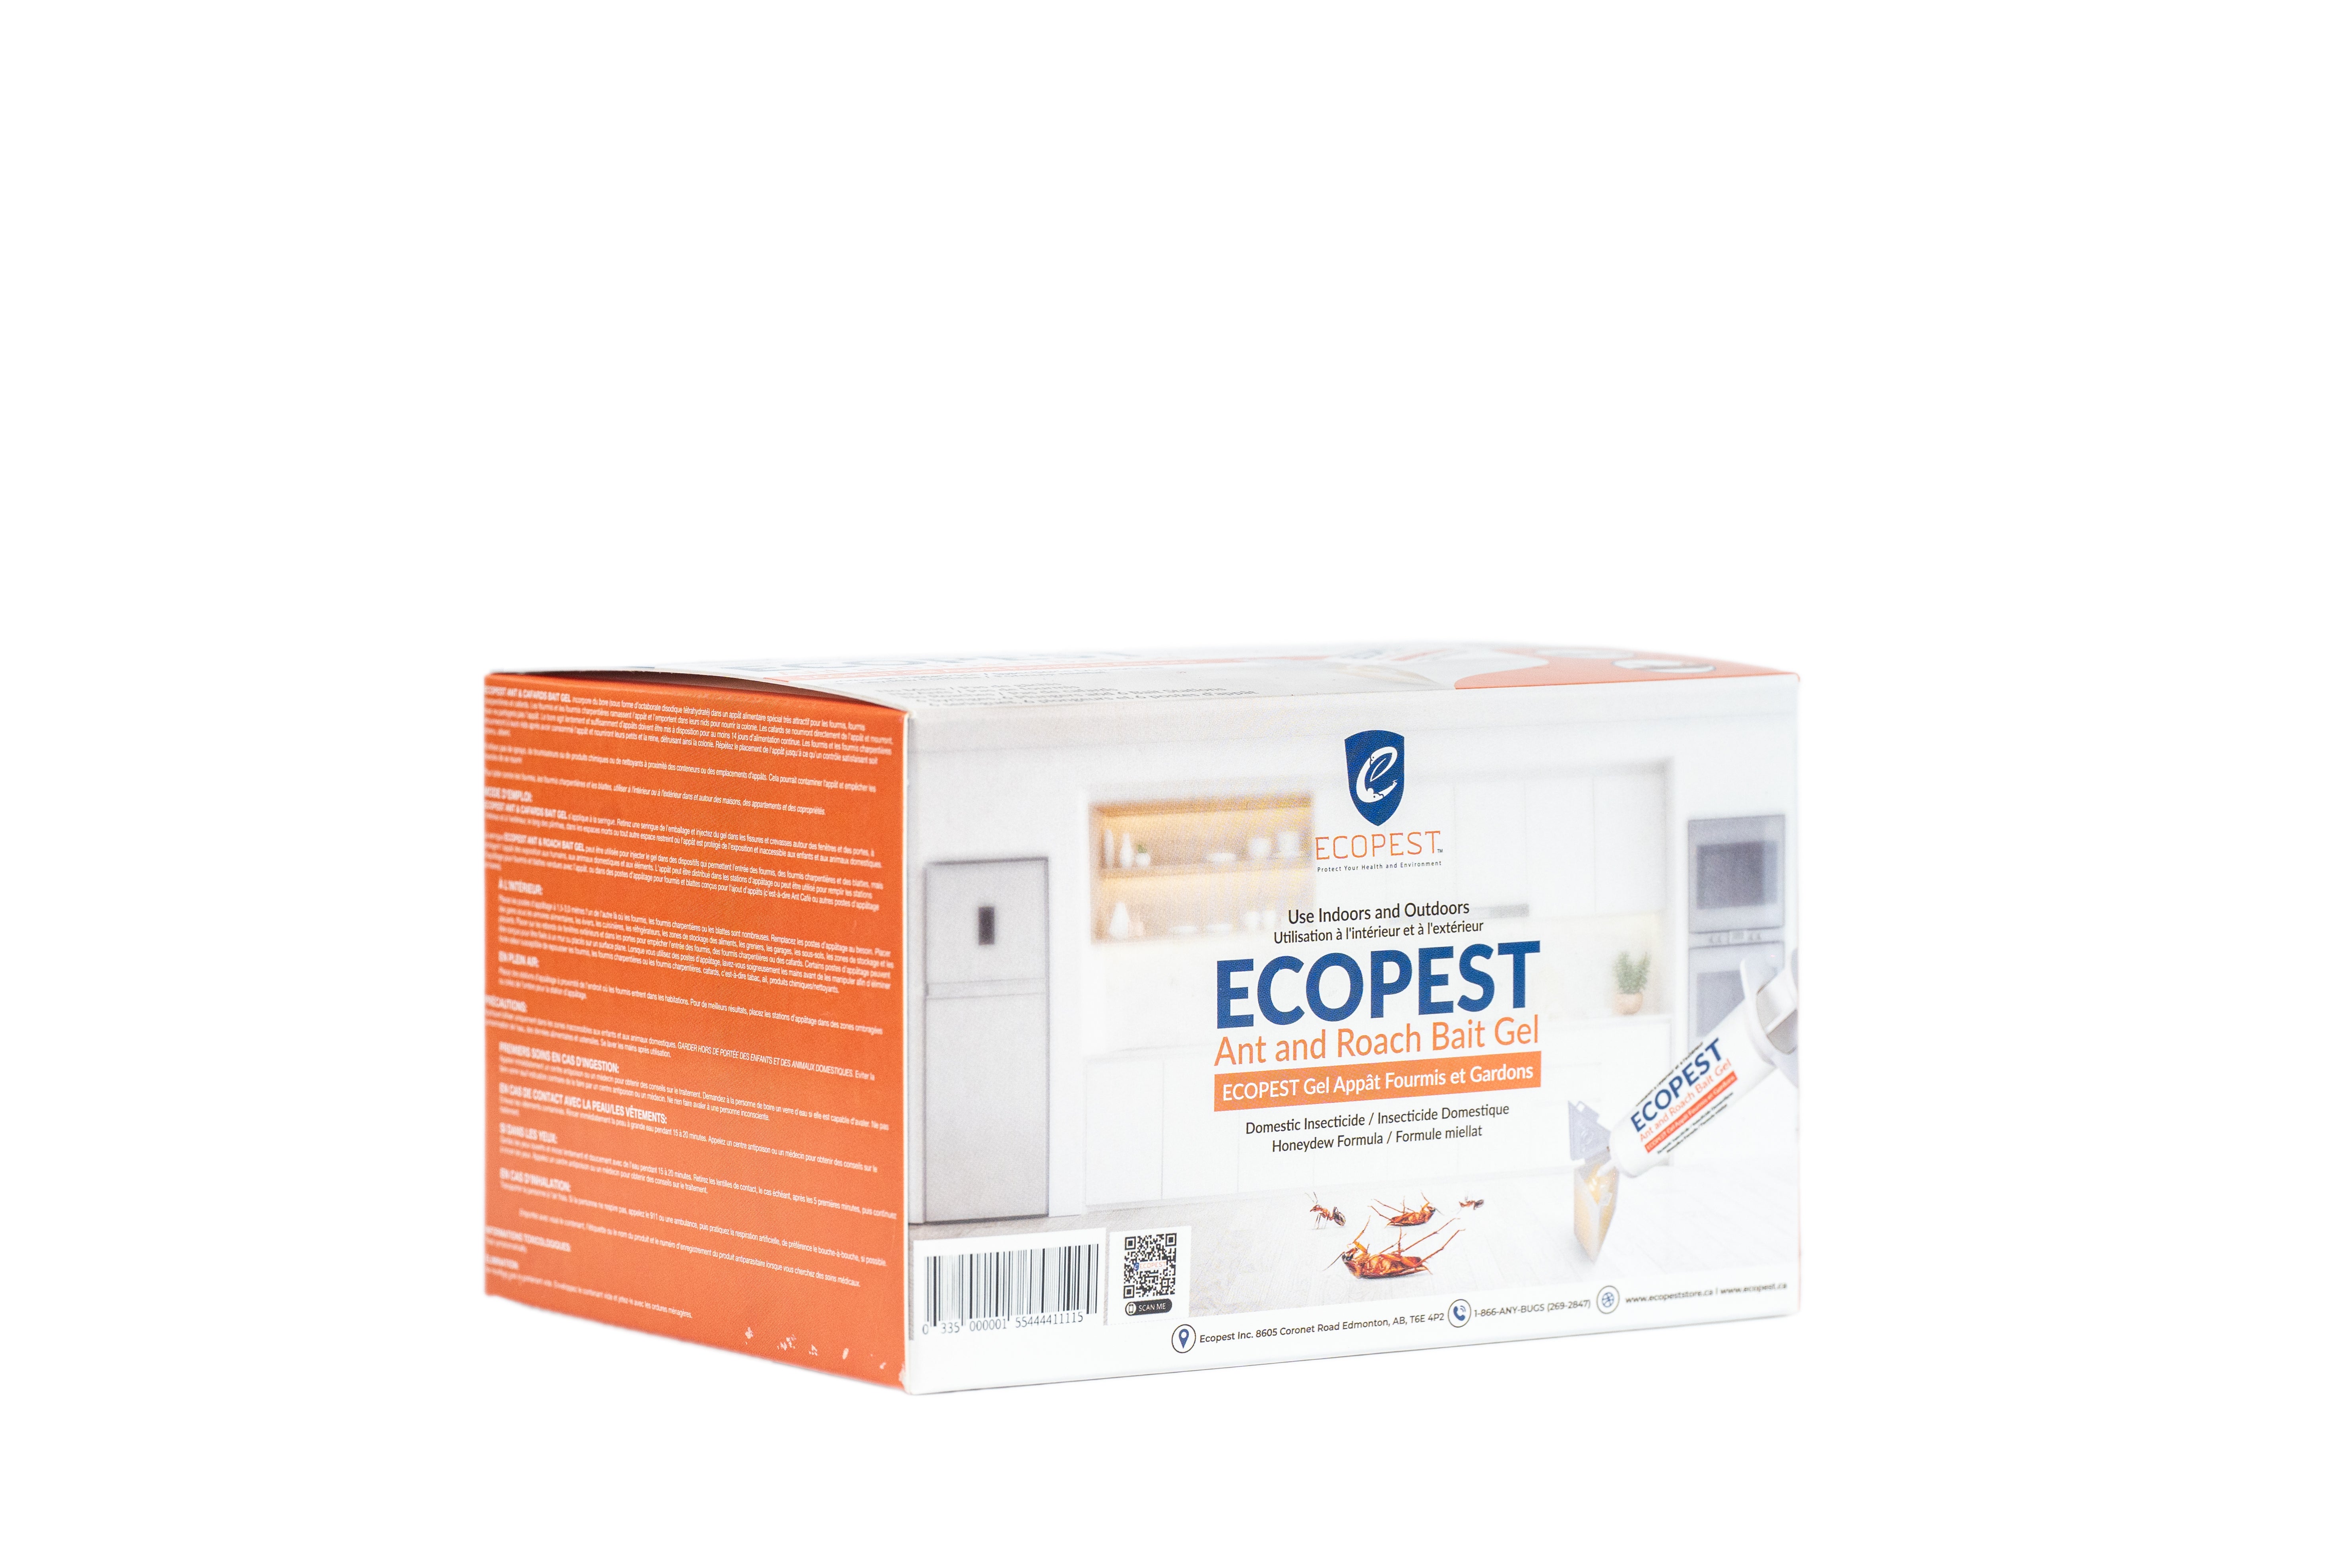 ECOPEST Ant and Roach Bait Gel